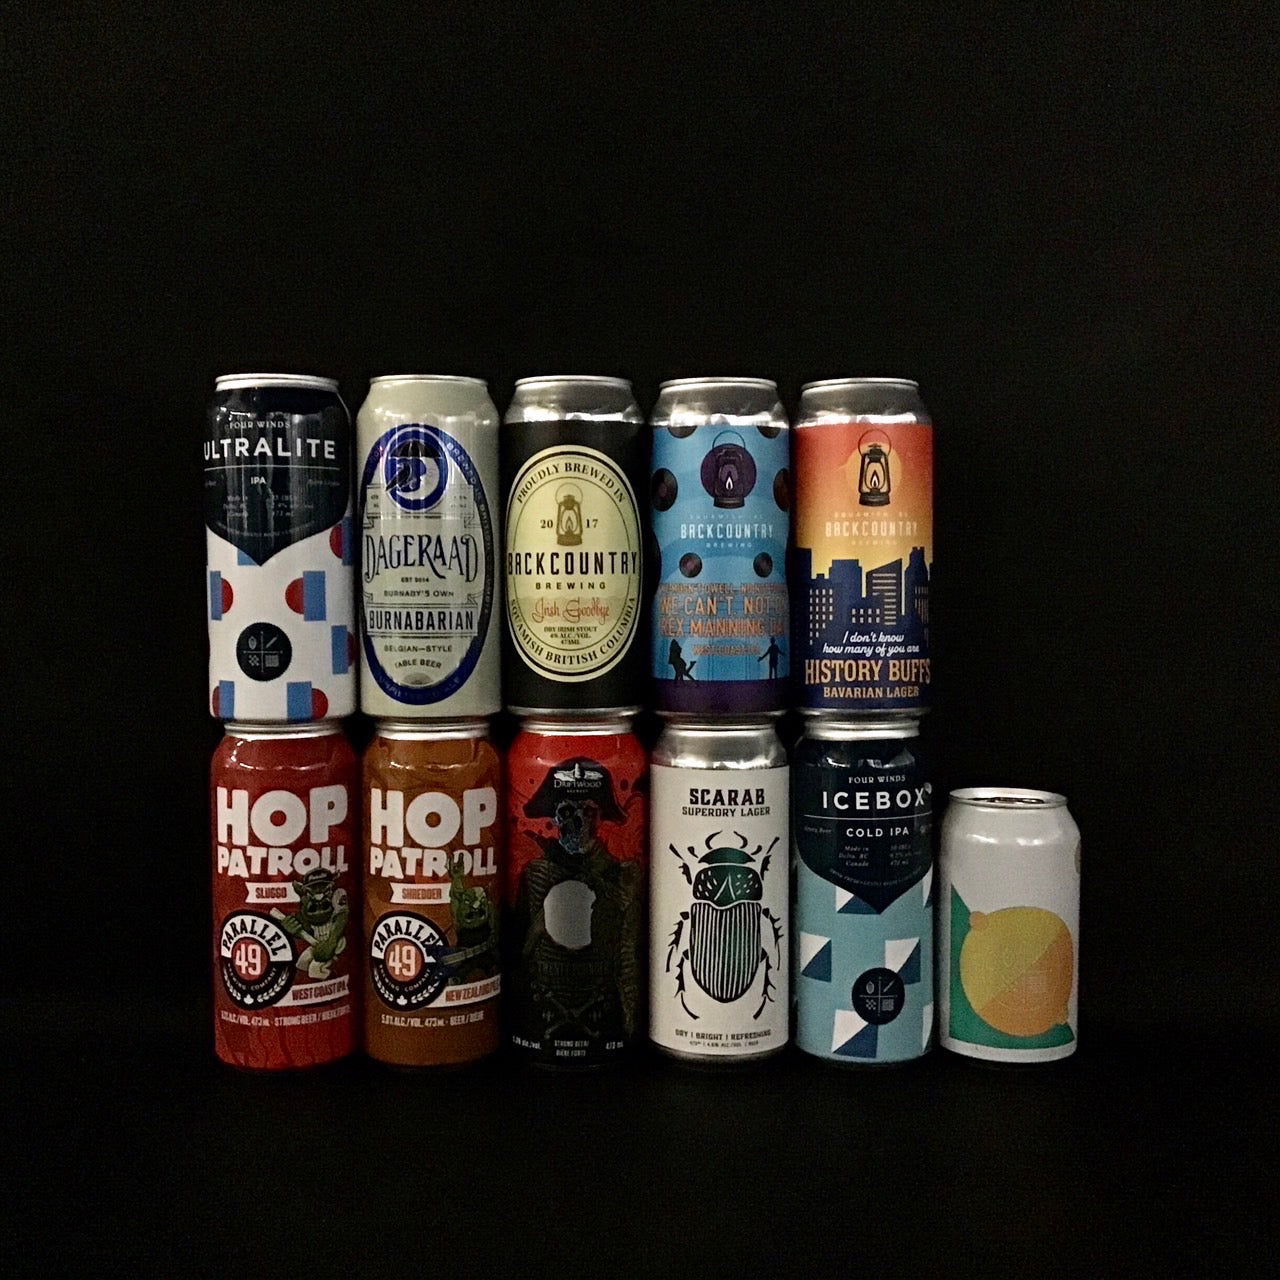 OWLE輸入の新入荷！正統派ビール11本セット – Beer OWLE